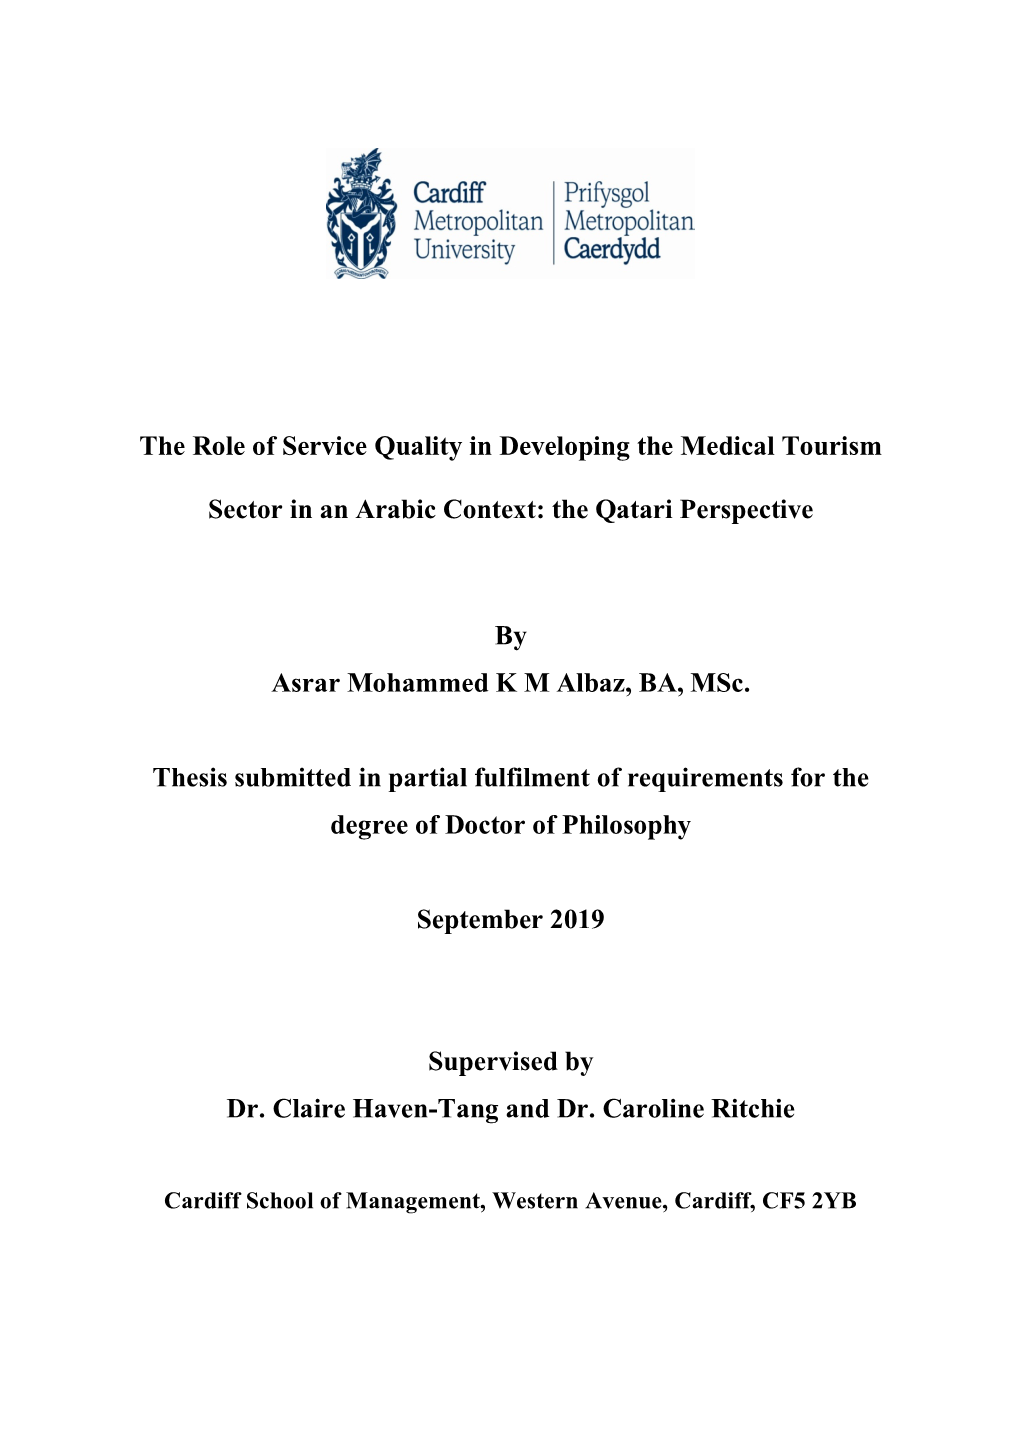 The Role of Service Quality in Developing the Medical Tourism